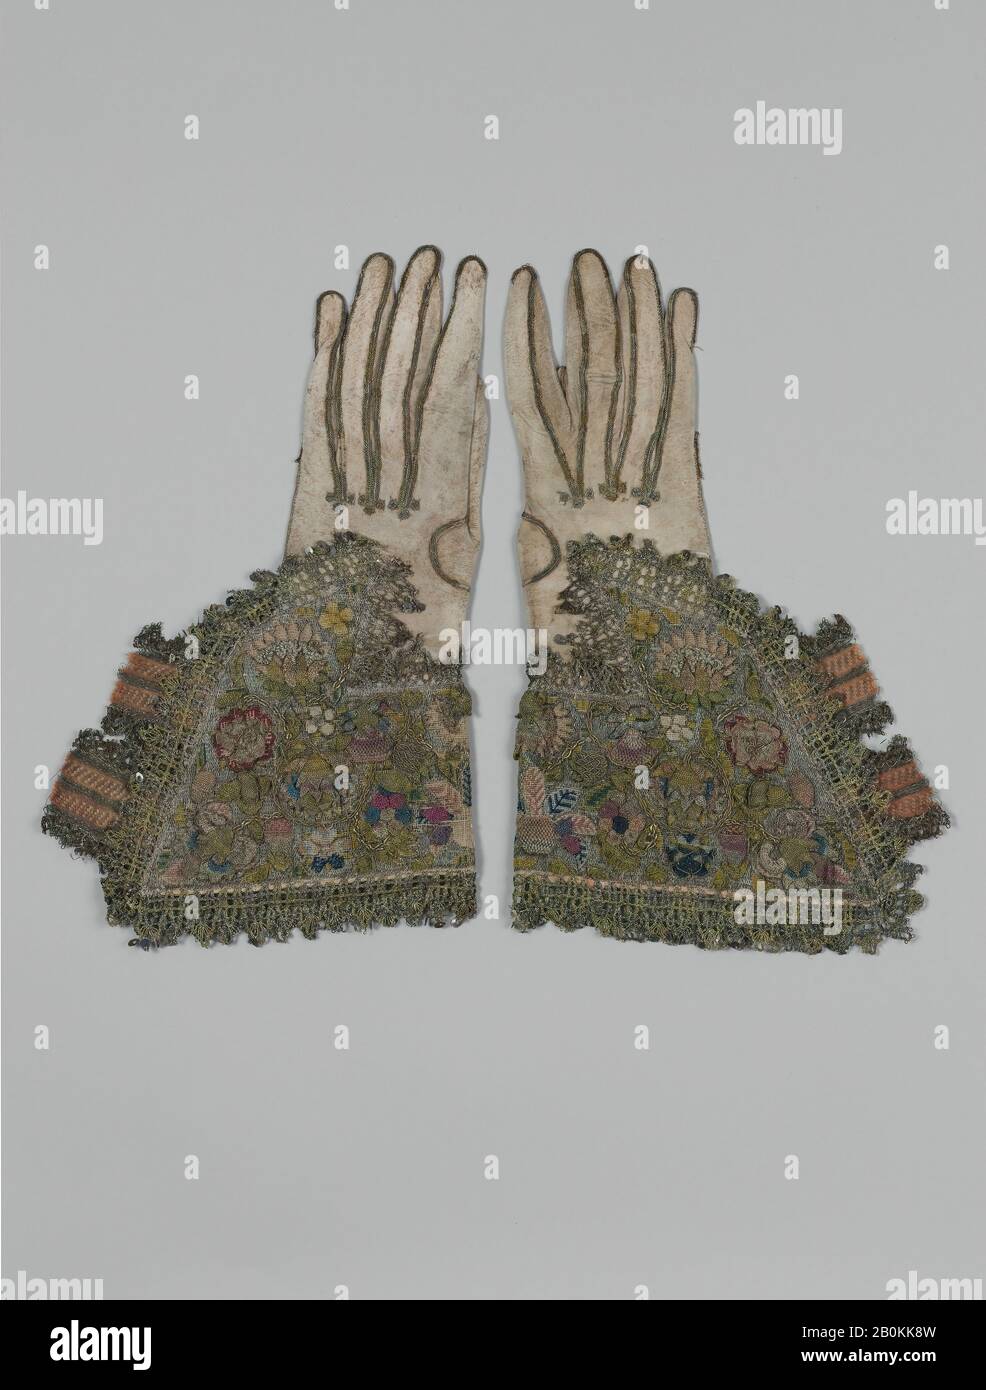 Pair of gloves, British, first half 17th century, British, Leather; canvas worked with silk and metal thread; tent, Gobelin, detached buttonhole variations, and plaited braid stitches; metal bobbin lace; silk and metal ribbon, L. 13 1/4 x W. 8 inches (33.7 x 20.3 cm), Textiles-Embroidered Stock Photo